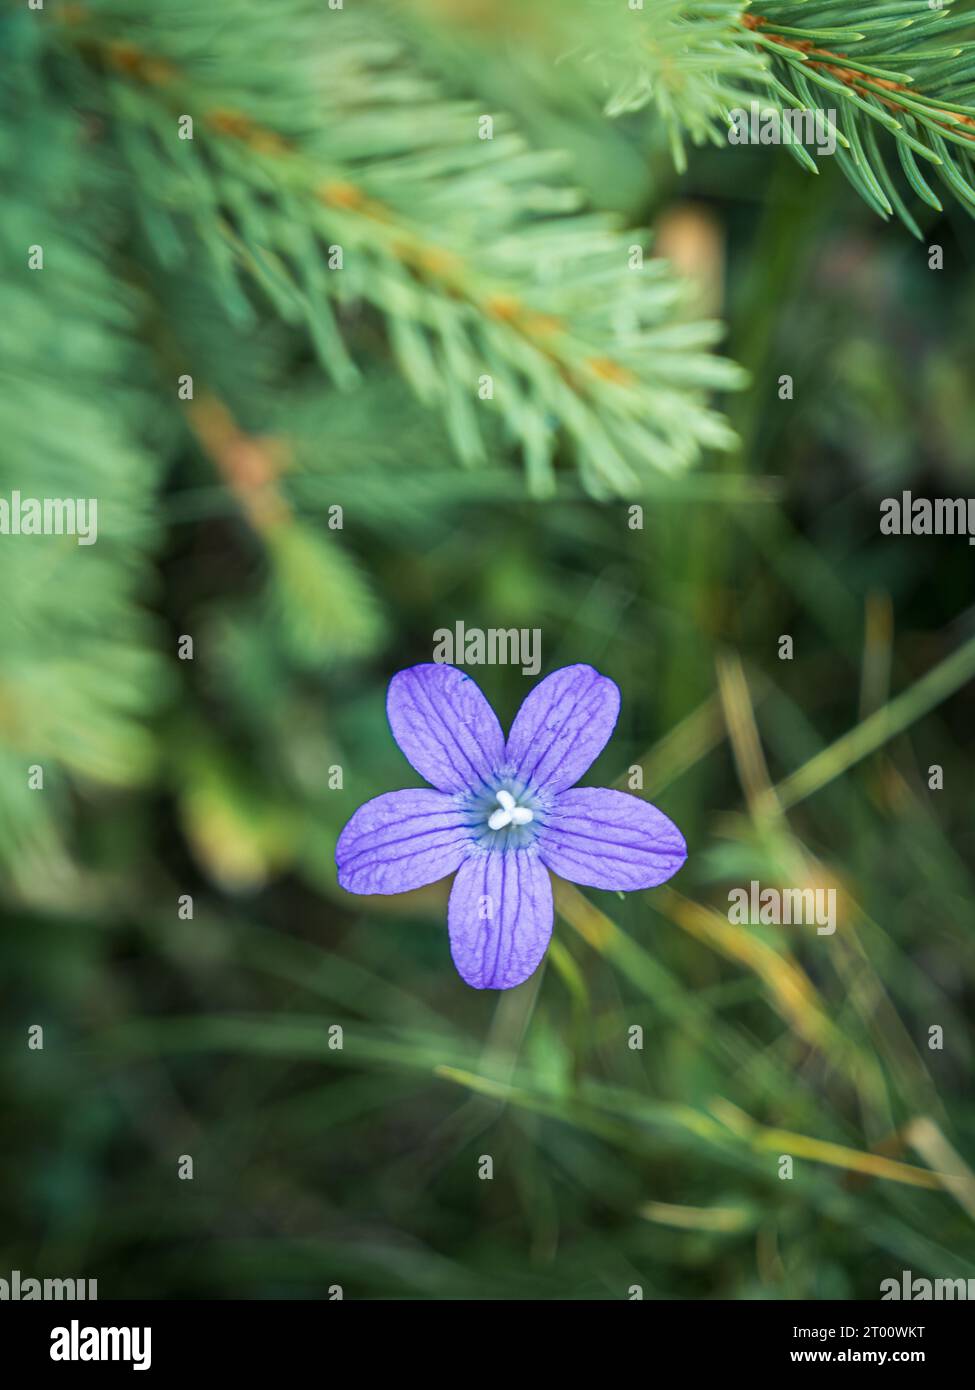 Purple venus' looking-glass flower blooming in grass pine tree branch background Stock Photo